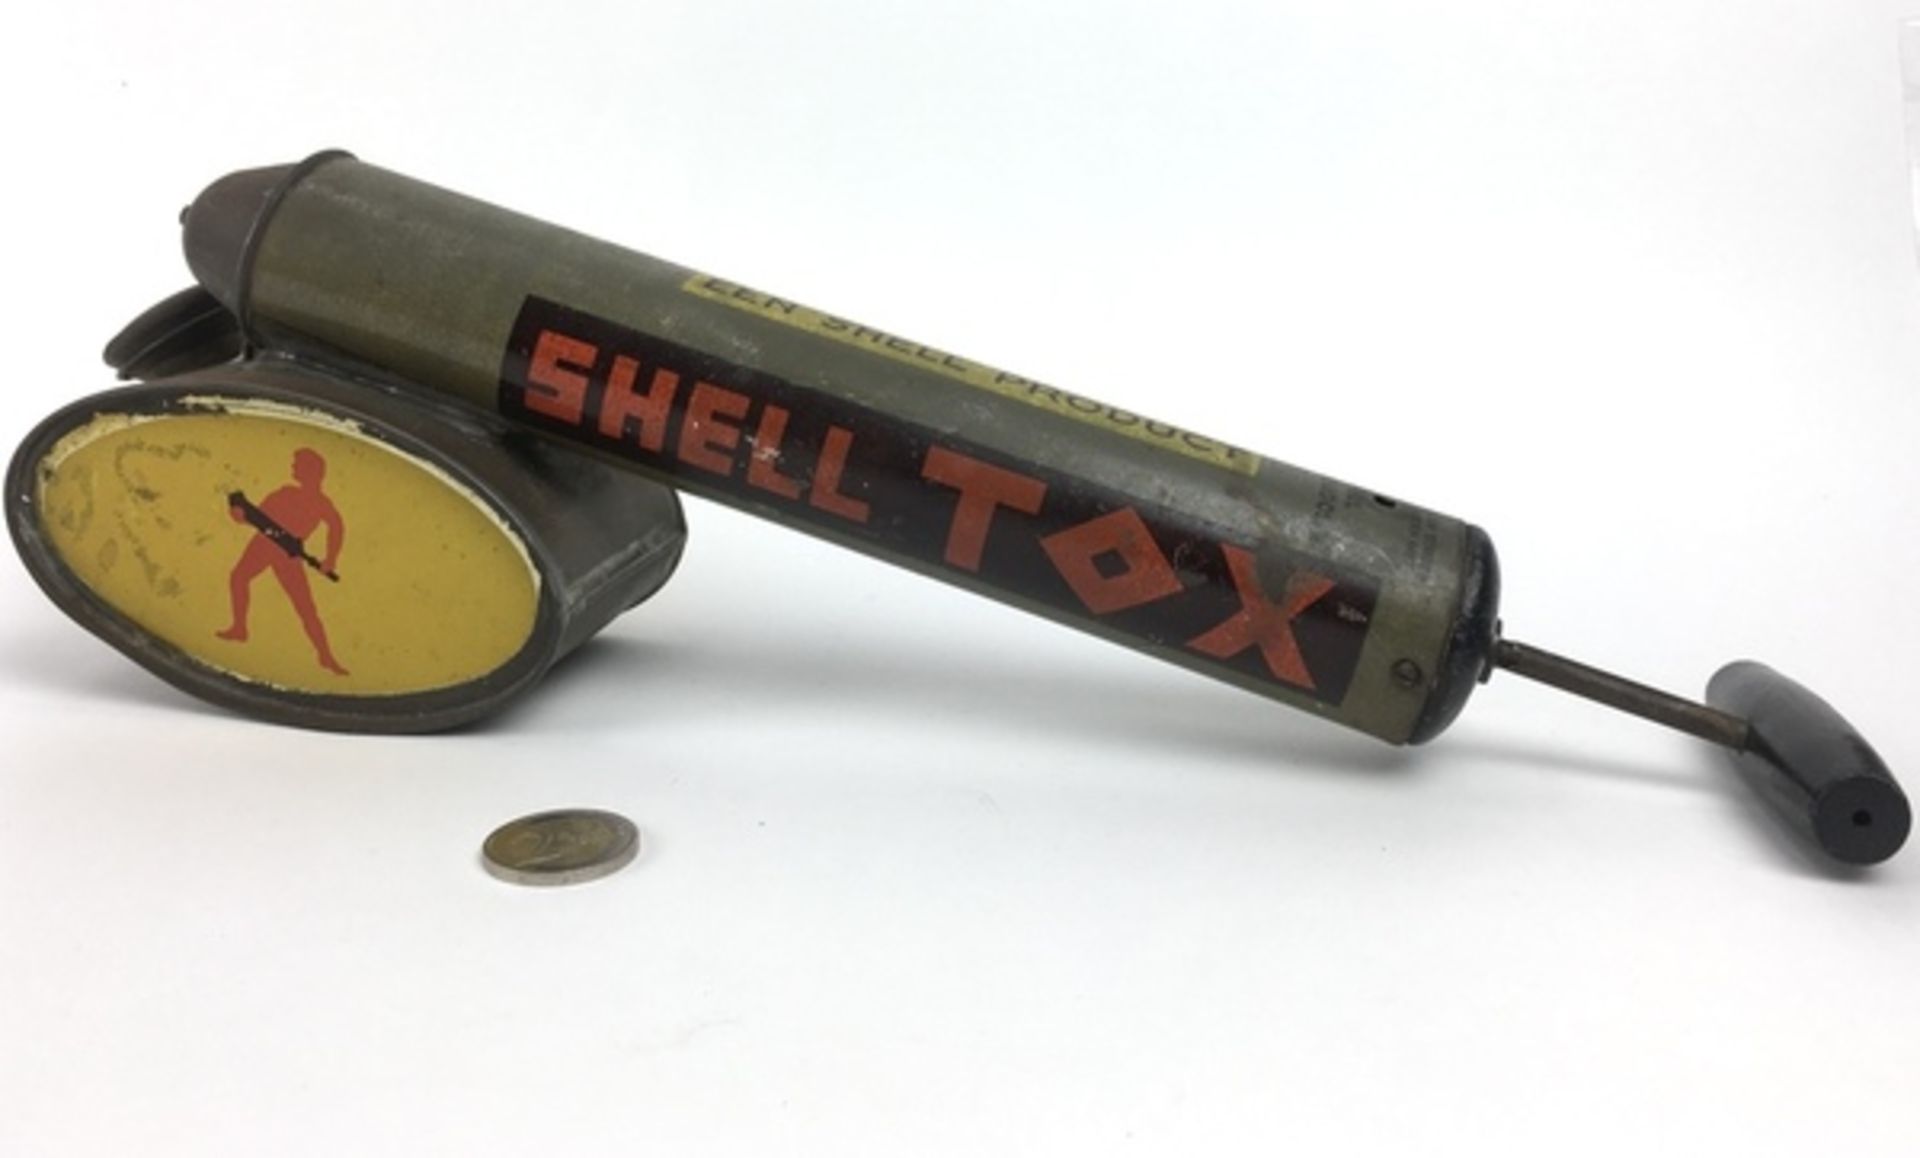 (Curiosa) Shell Tox insecticide verstuiver Shell Tox insecticide verstuiver uit de periode 193 - Bild 2 aus 7